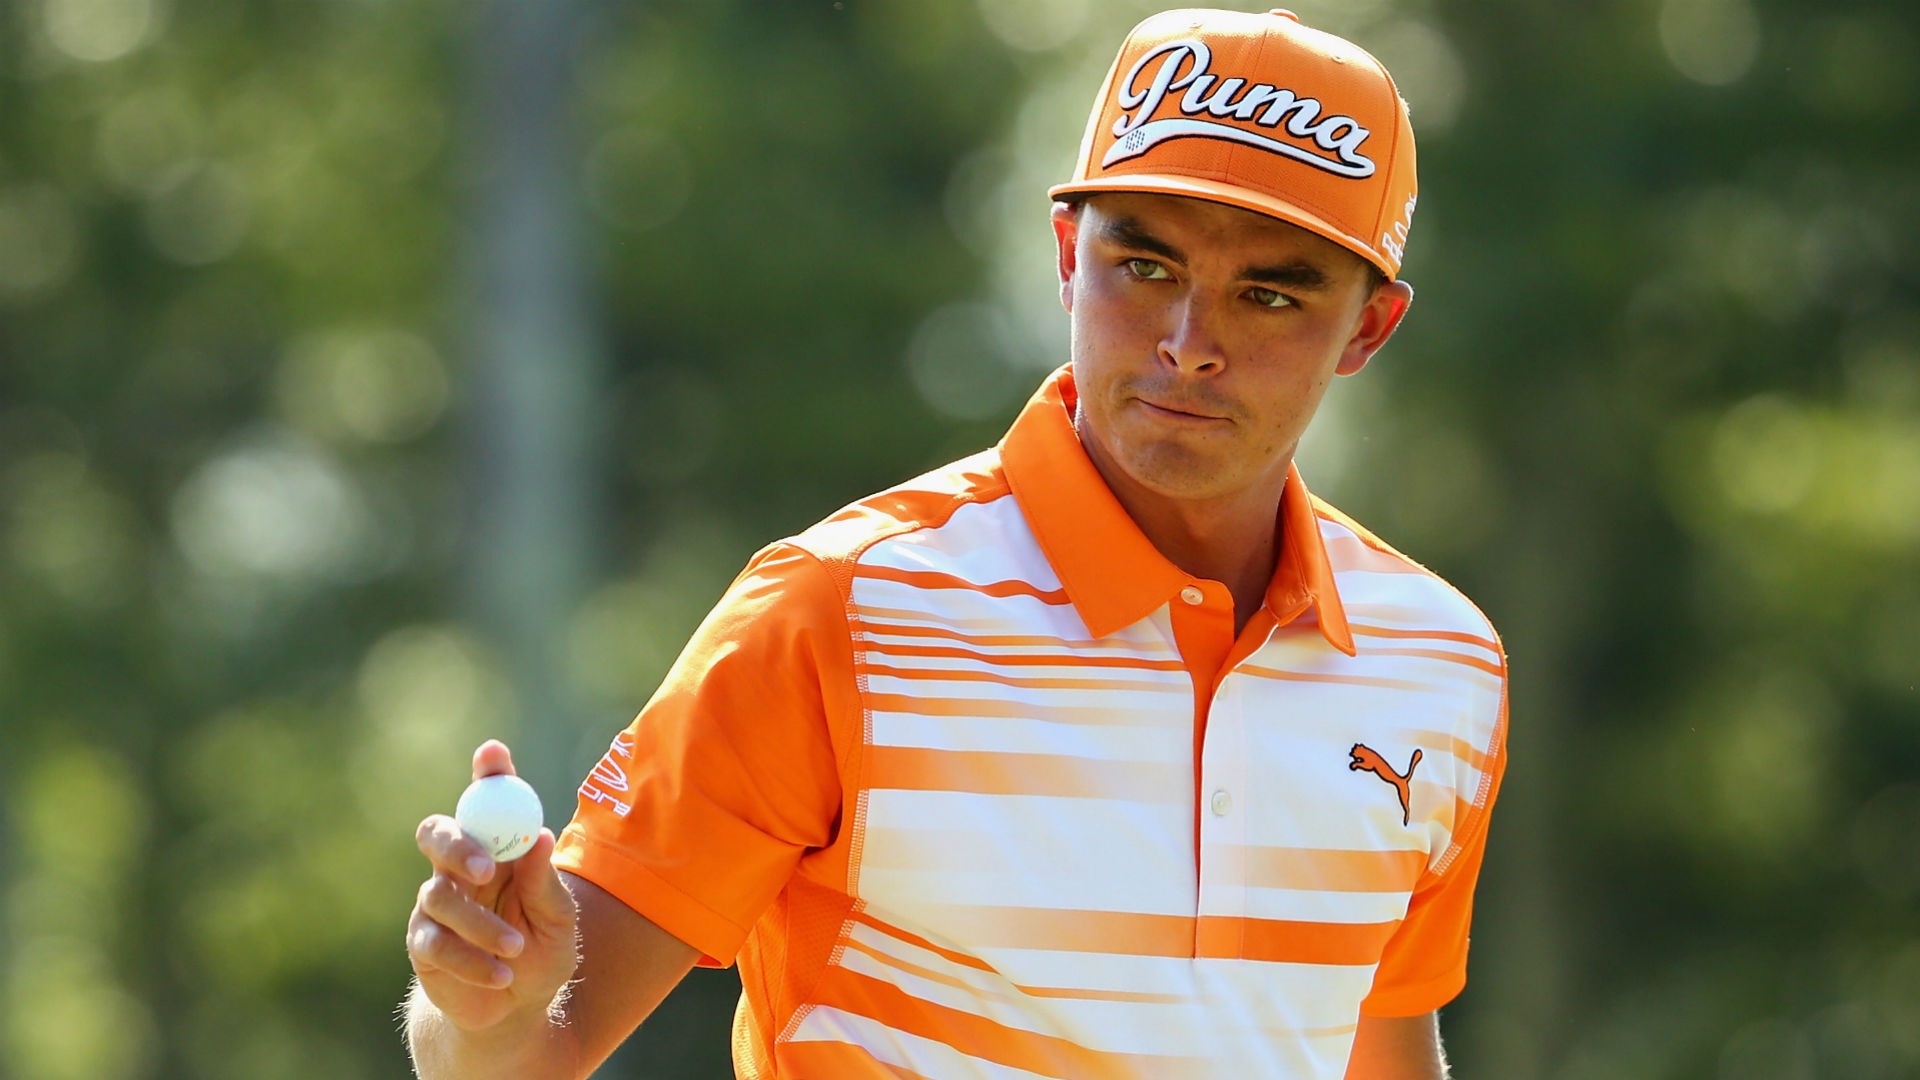 Golfer Rickie Fowler says he lacks Big Three credentials Other